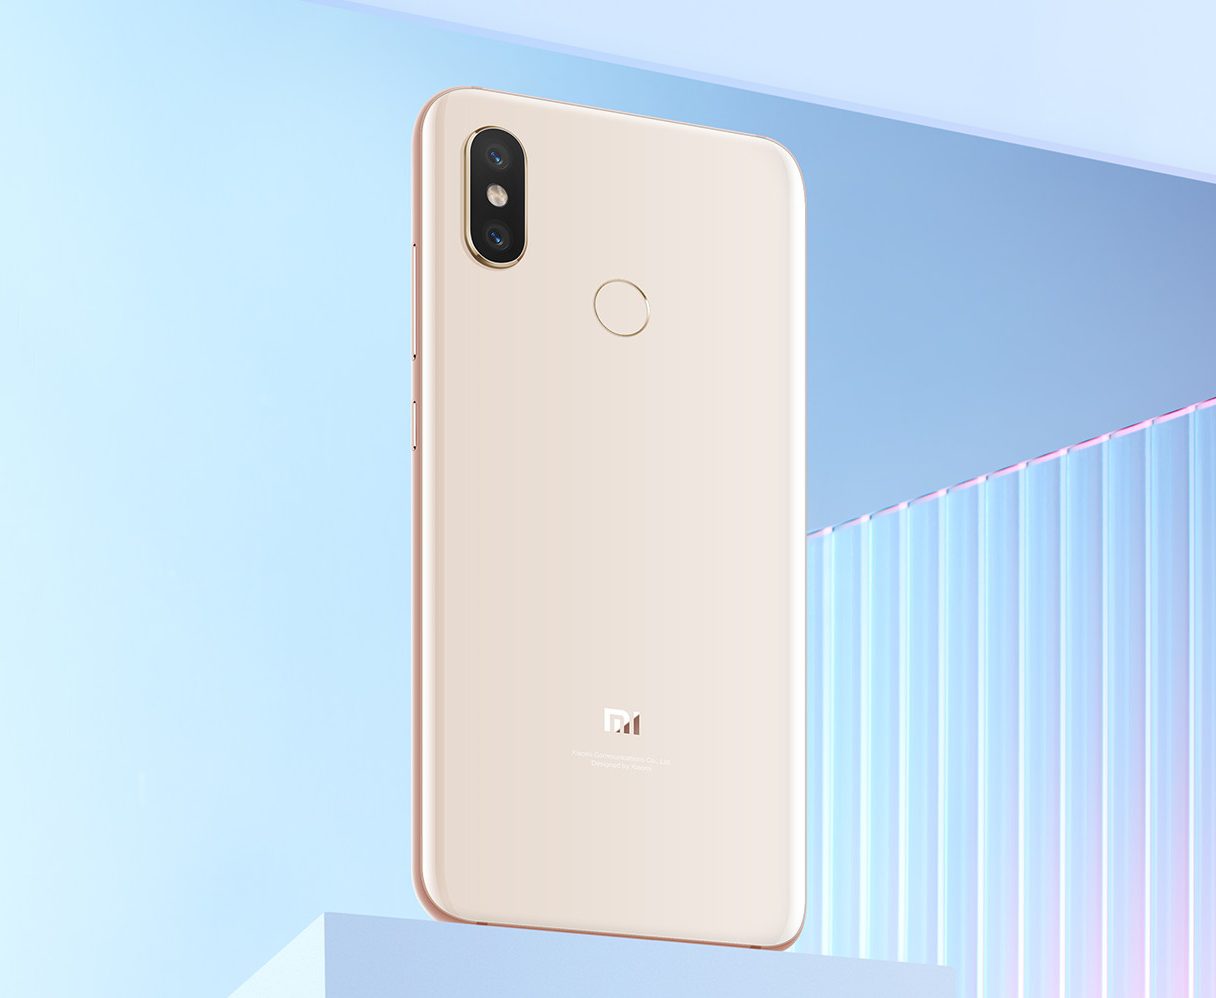 Xiaomi Mi 8 launched with Snapdragon 845, notched display 3